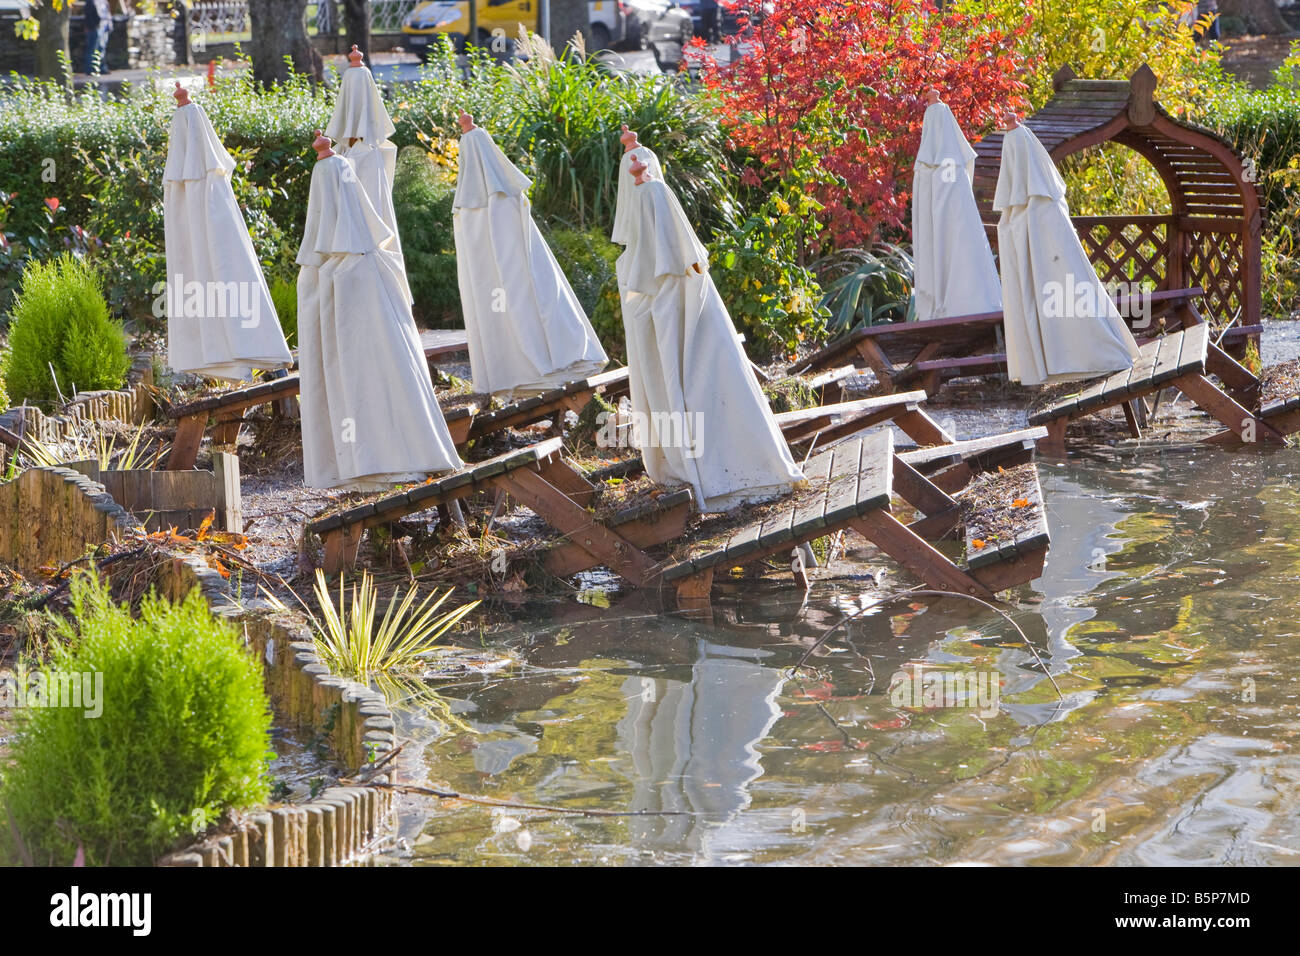 Flooding in the beer garden of The Wateredge Inn at Waterhead on Lake Windermere in Ambleside UK Stock Photo